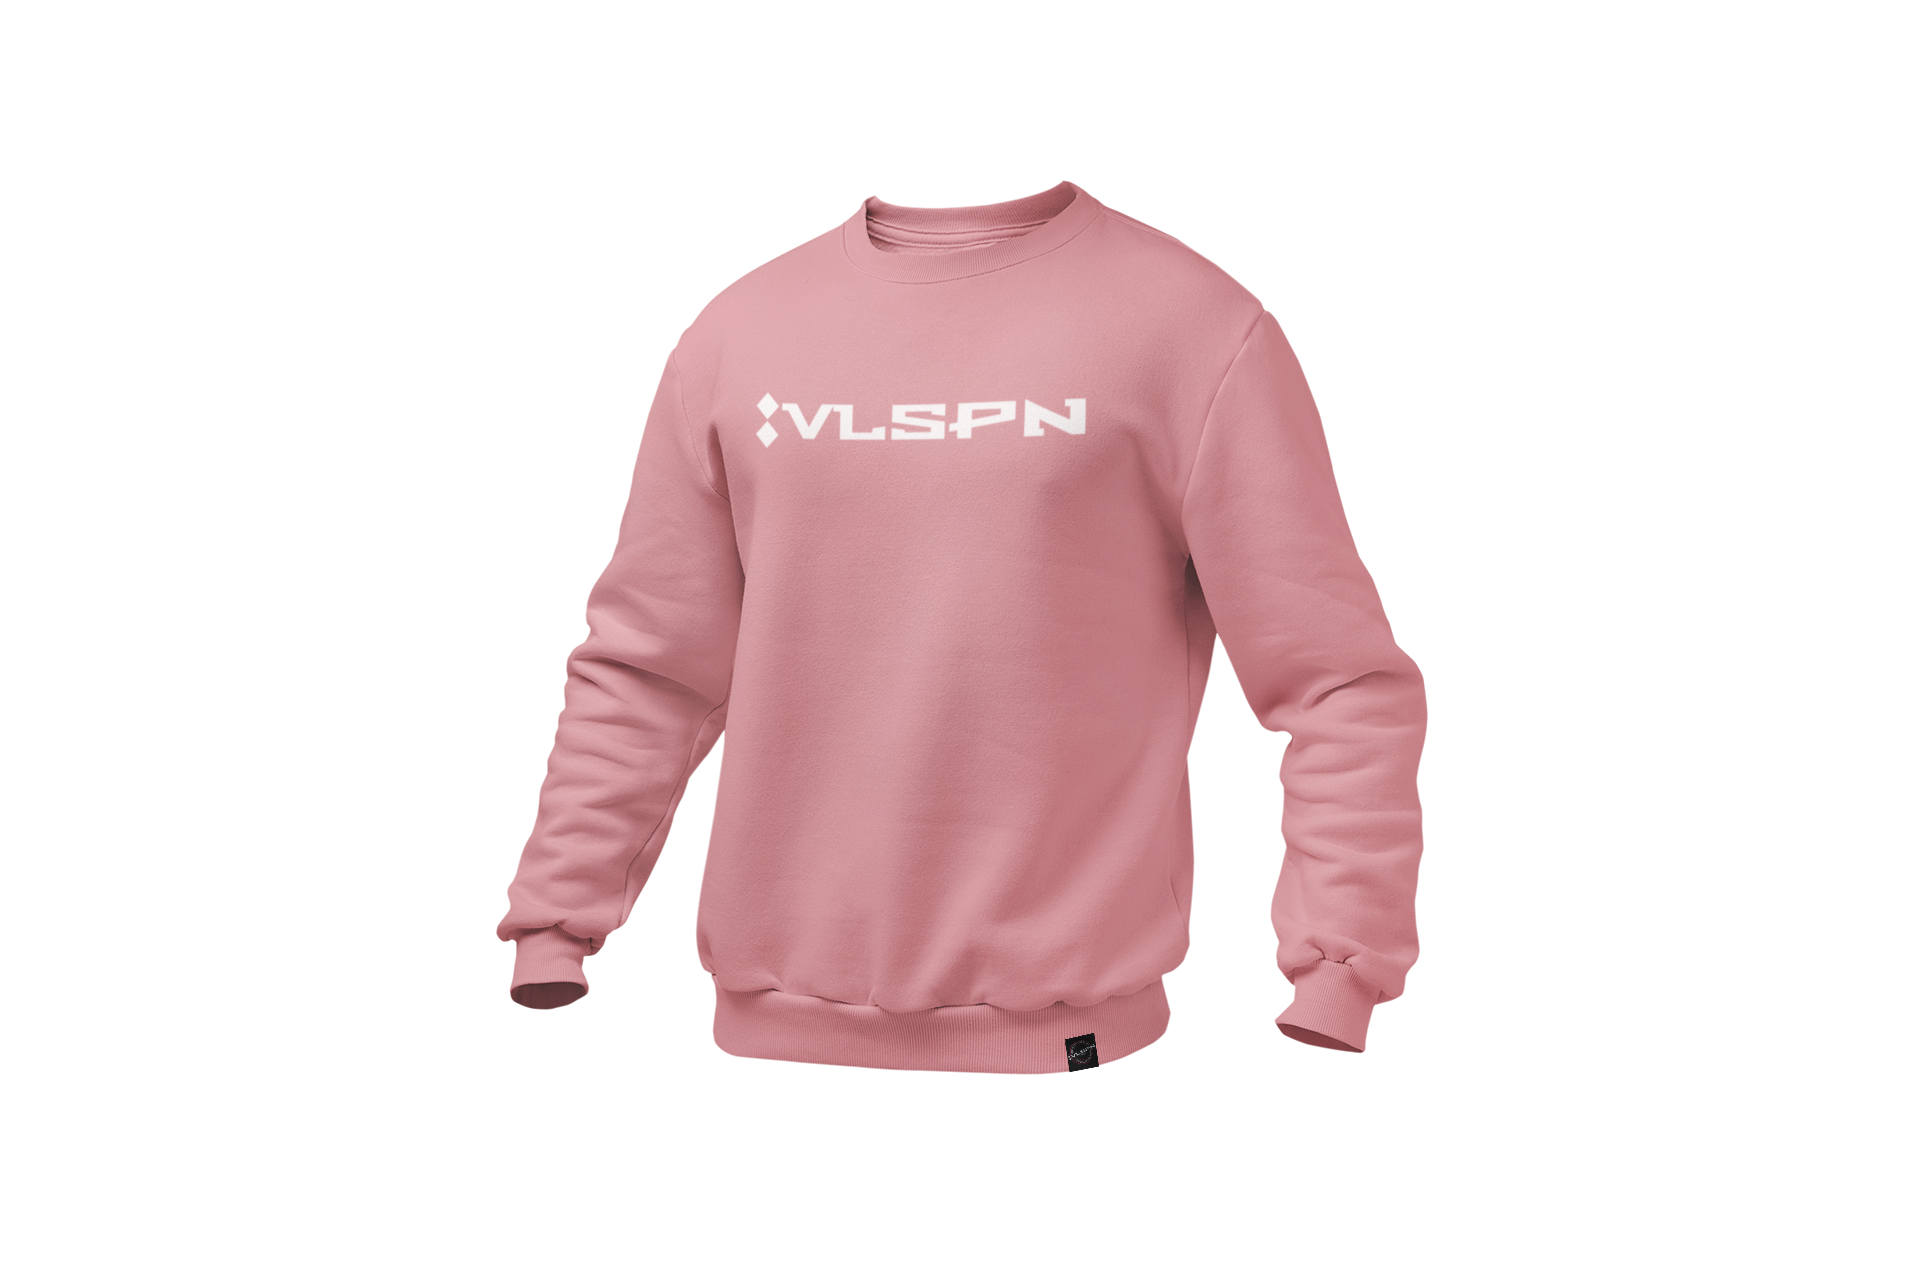 mockup-of-a-ghosted-crewneck-sweatshirt-over-a-solid-background-26960 (35).png